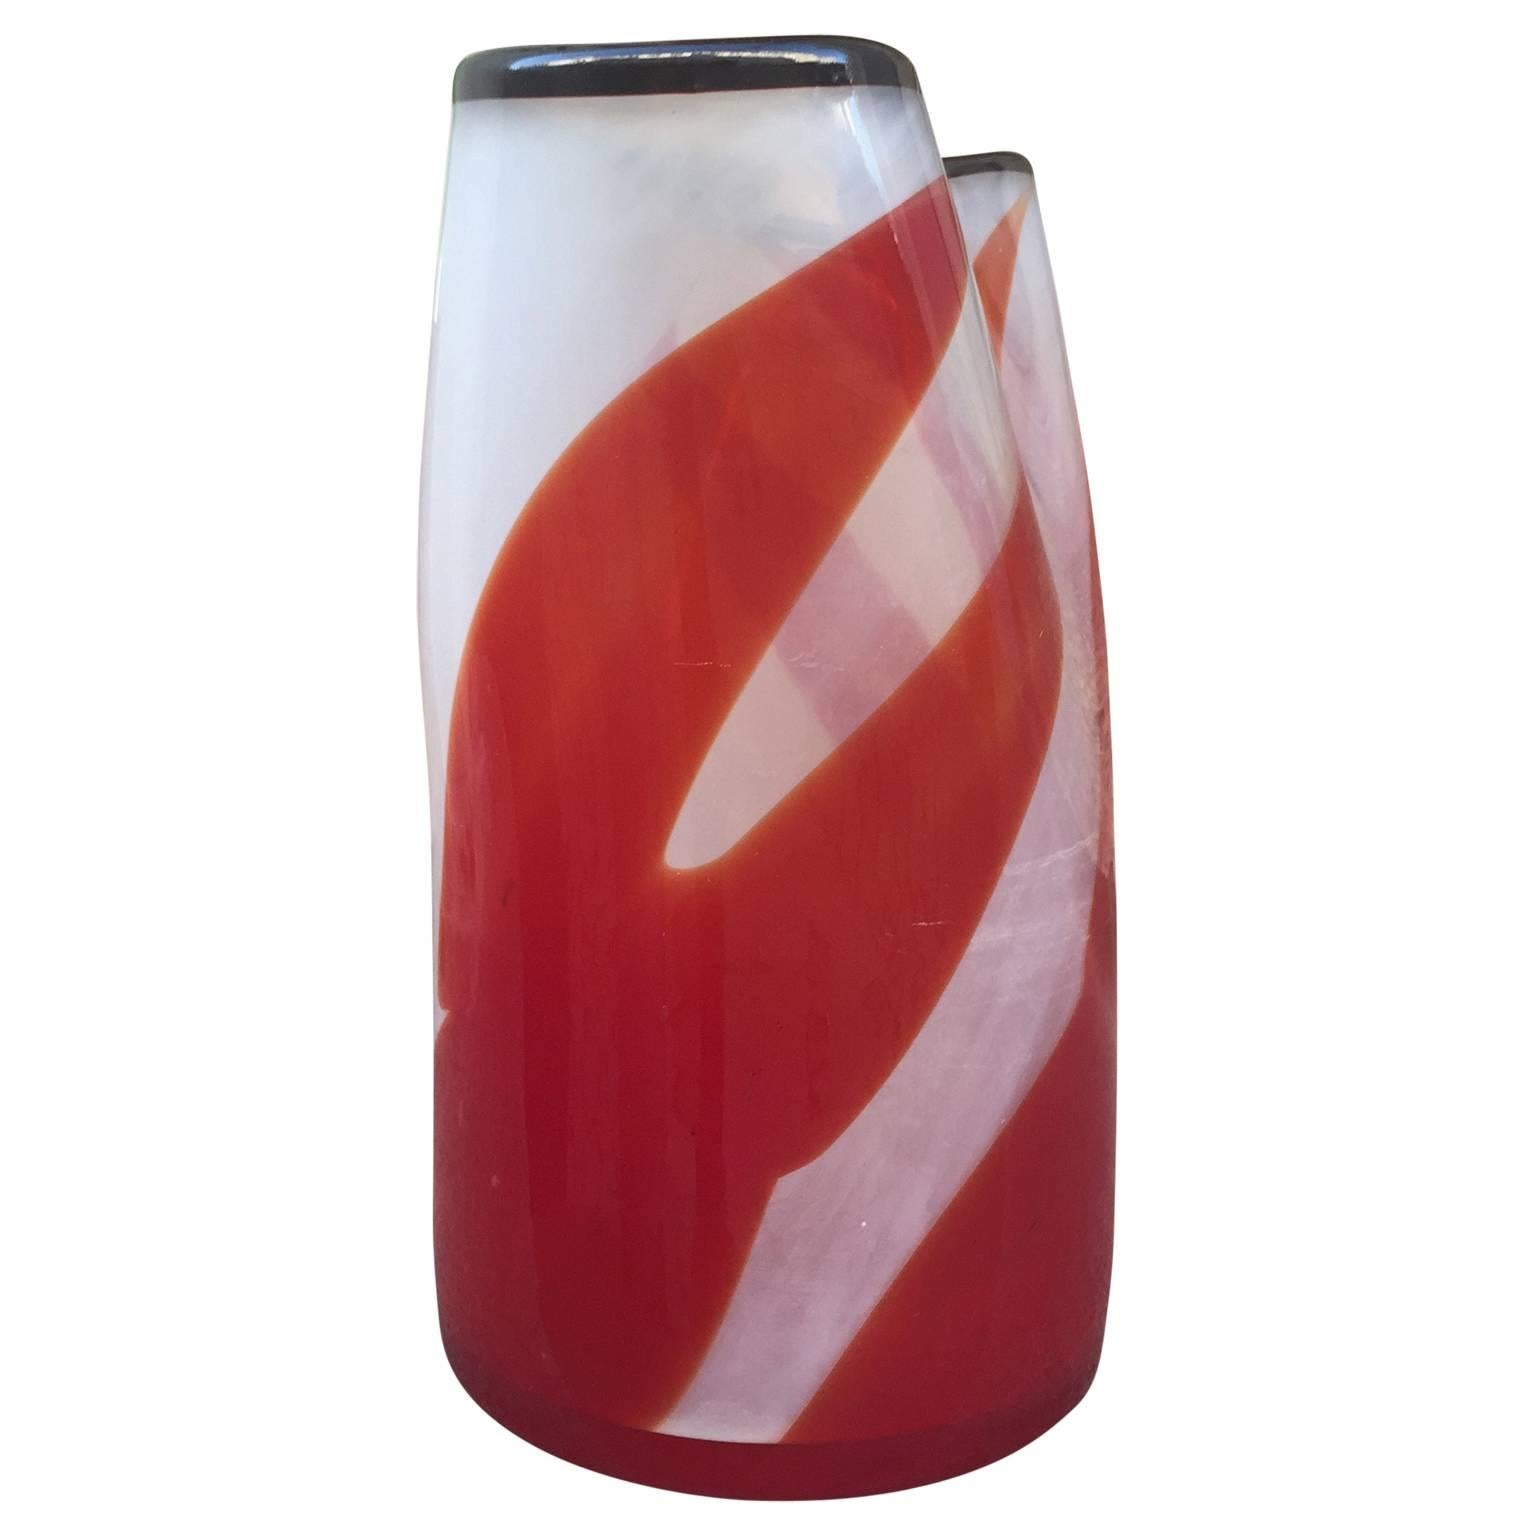 Lovely red and white vase in art glass. The vase is fully signed, but creator is not determined, see detailed image.